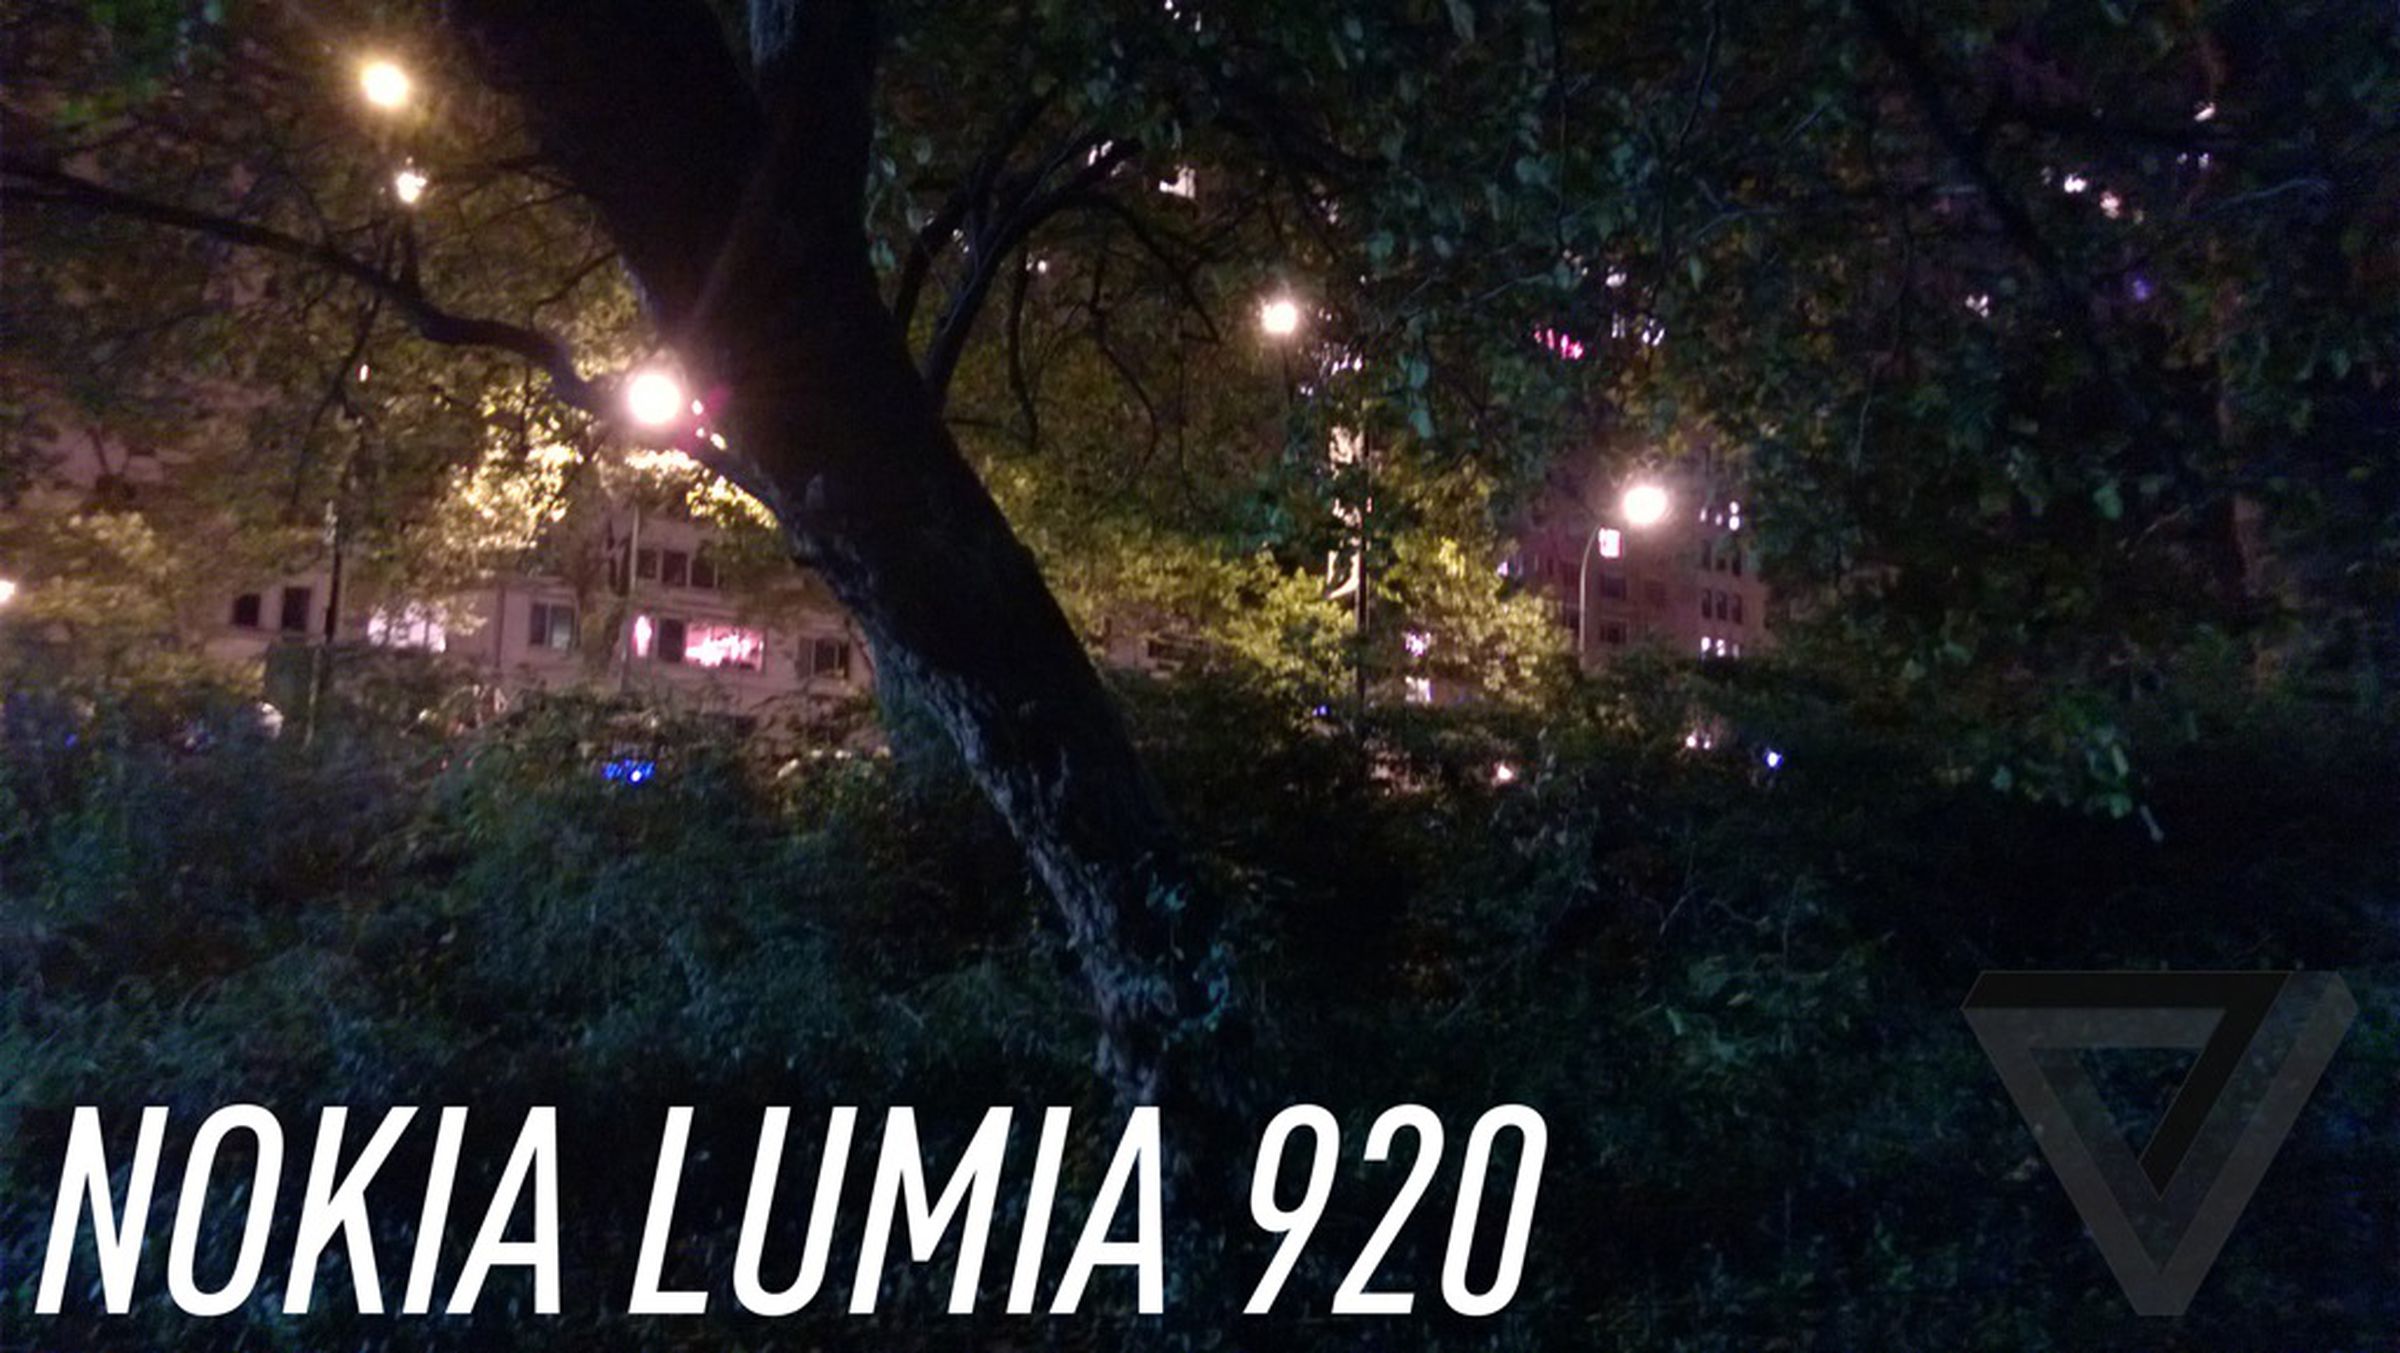 Nokia Lumia 920 low-light sample images vs the competition